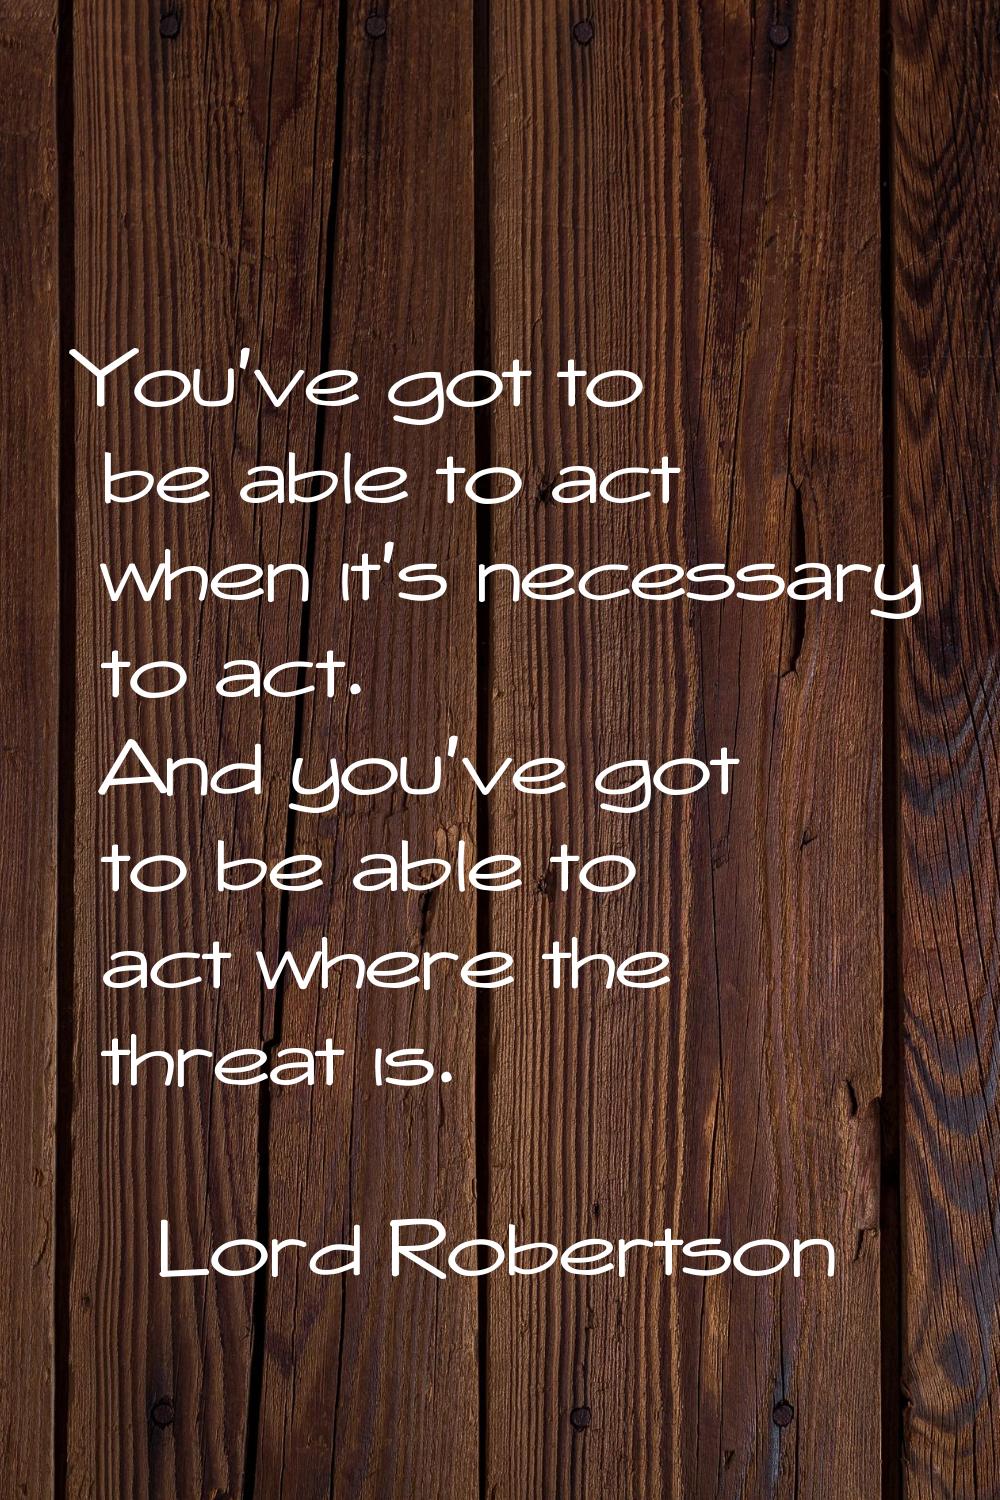 You've got to be able to act when it's necessary to act. And you've got to be able to act where the